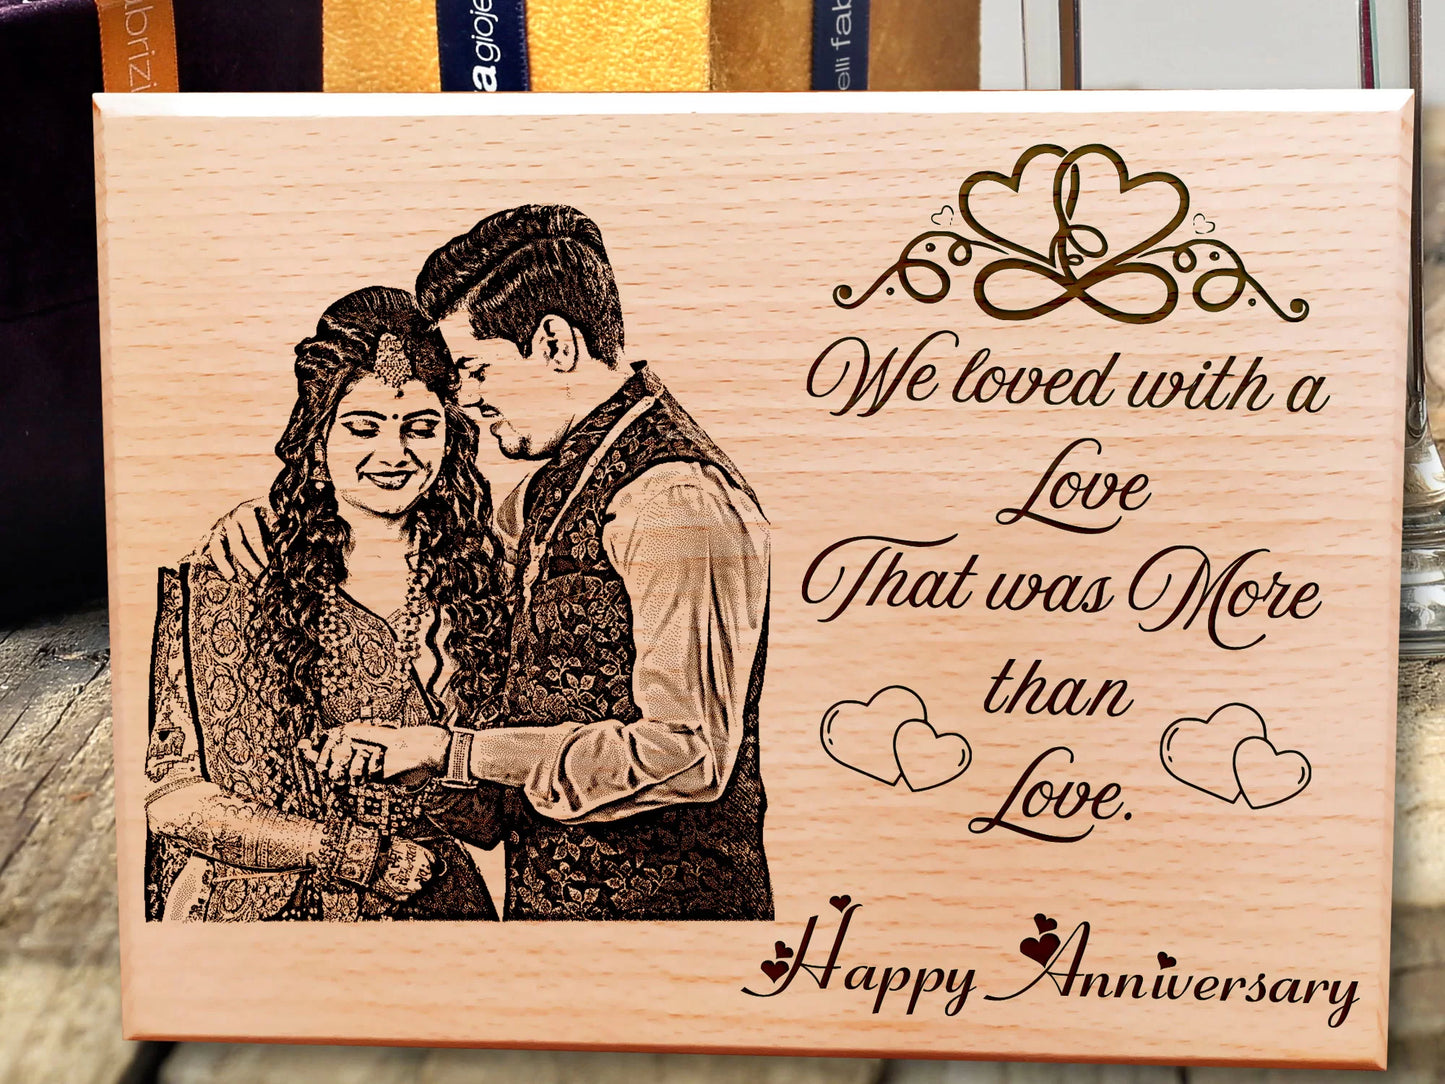 Personalized Engraved Marriage Gifts for Couples Photo Plaque (8 x 6 inches)